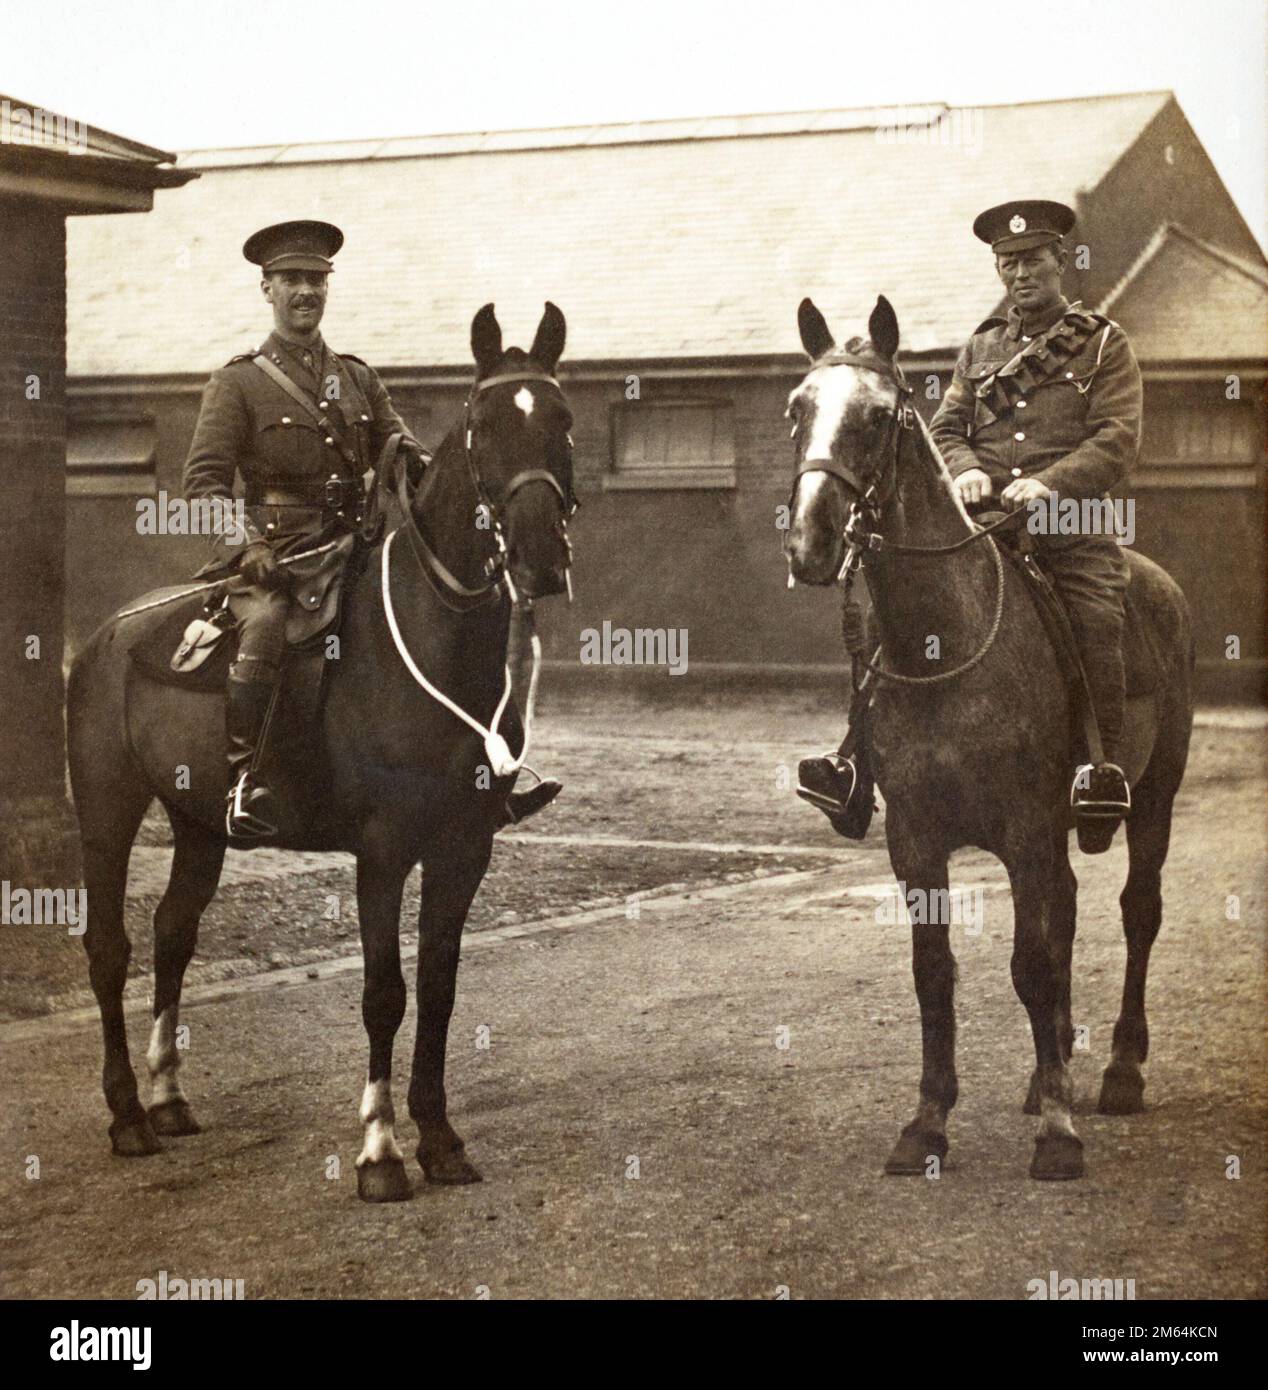 Two mounted British soldiers, a Captain and a Sapper in the Royal Engineers, during the First World War. Stock Photo